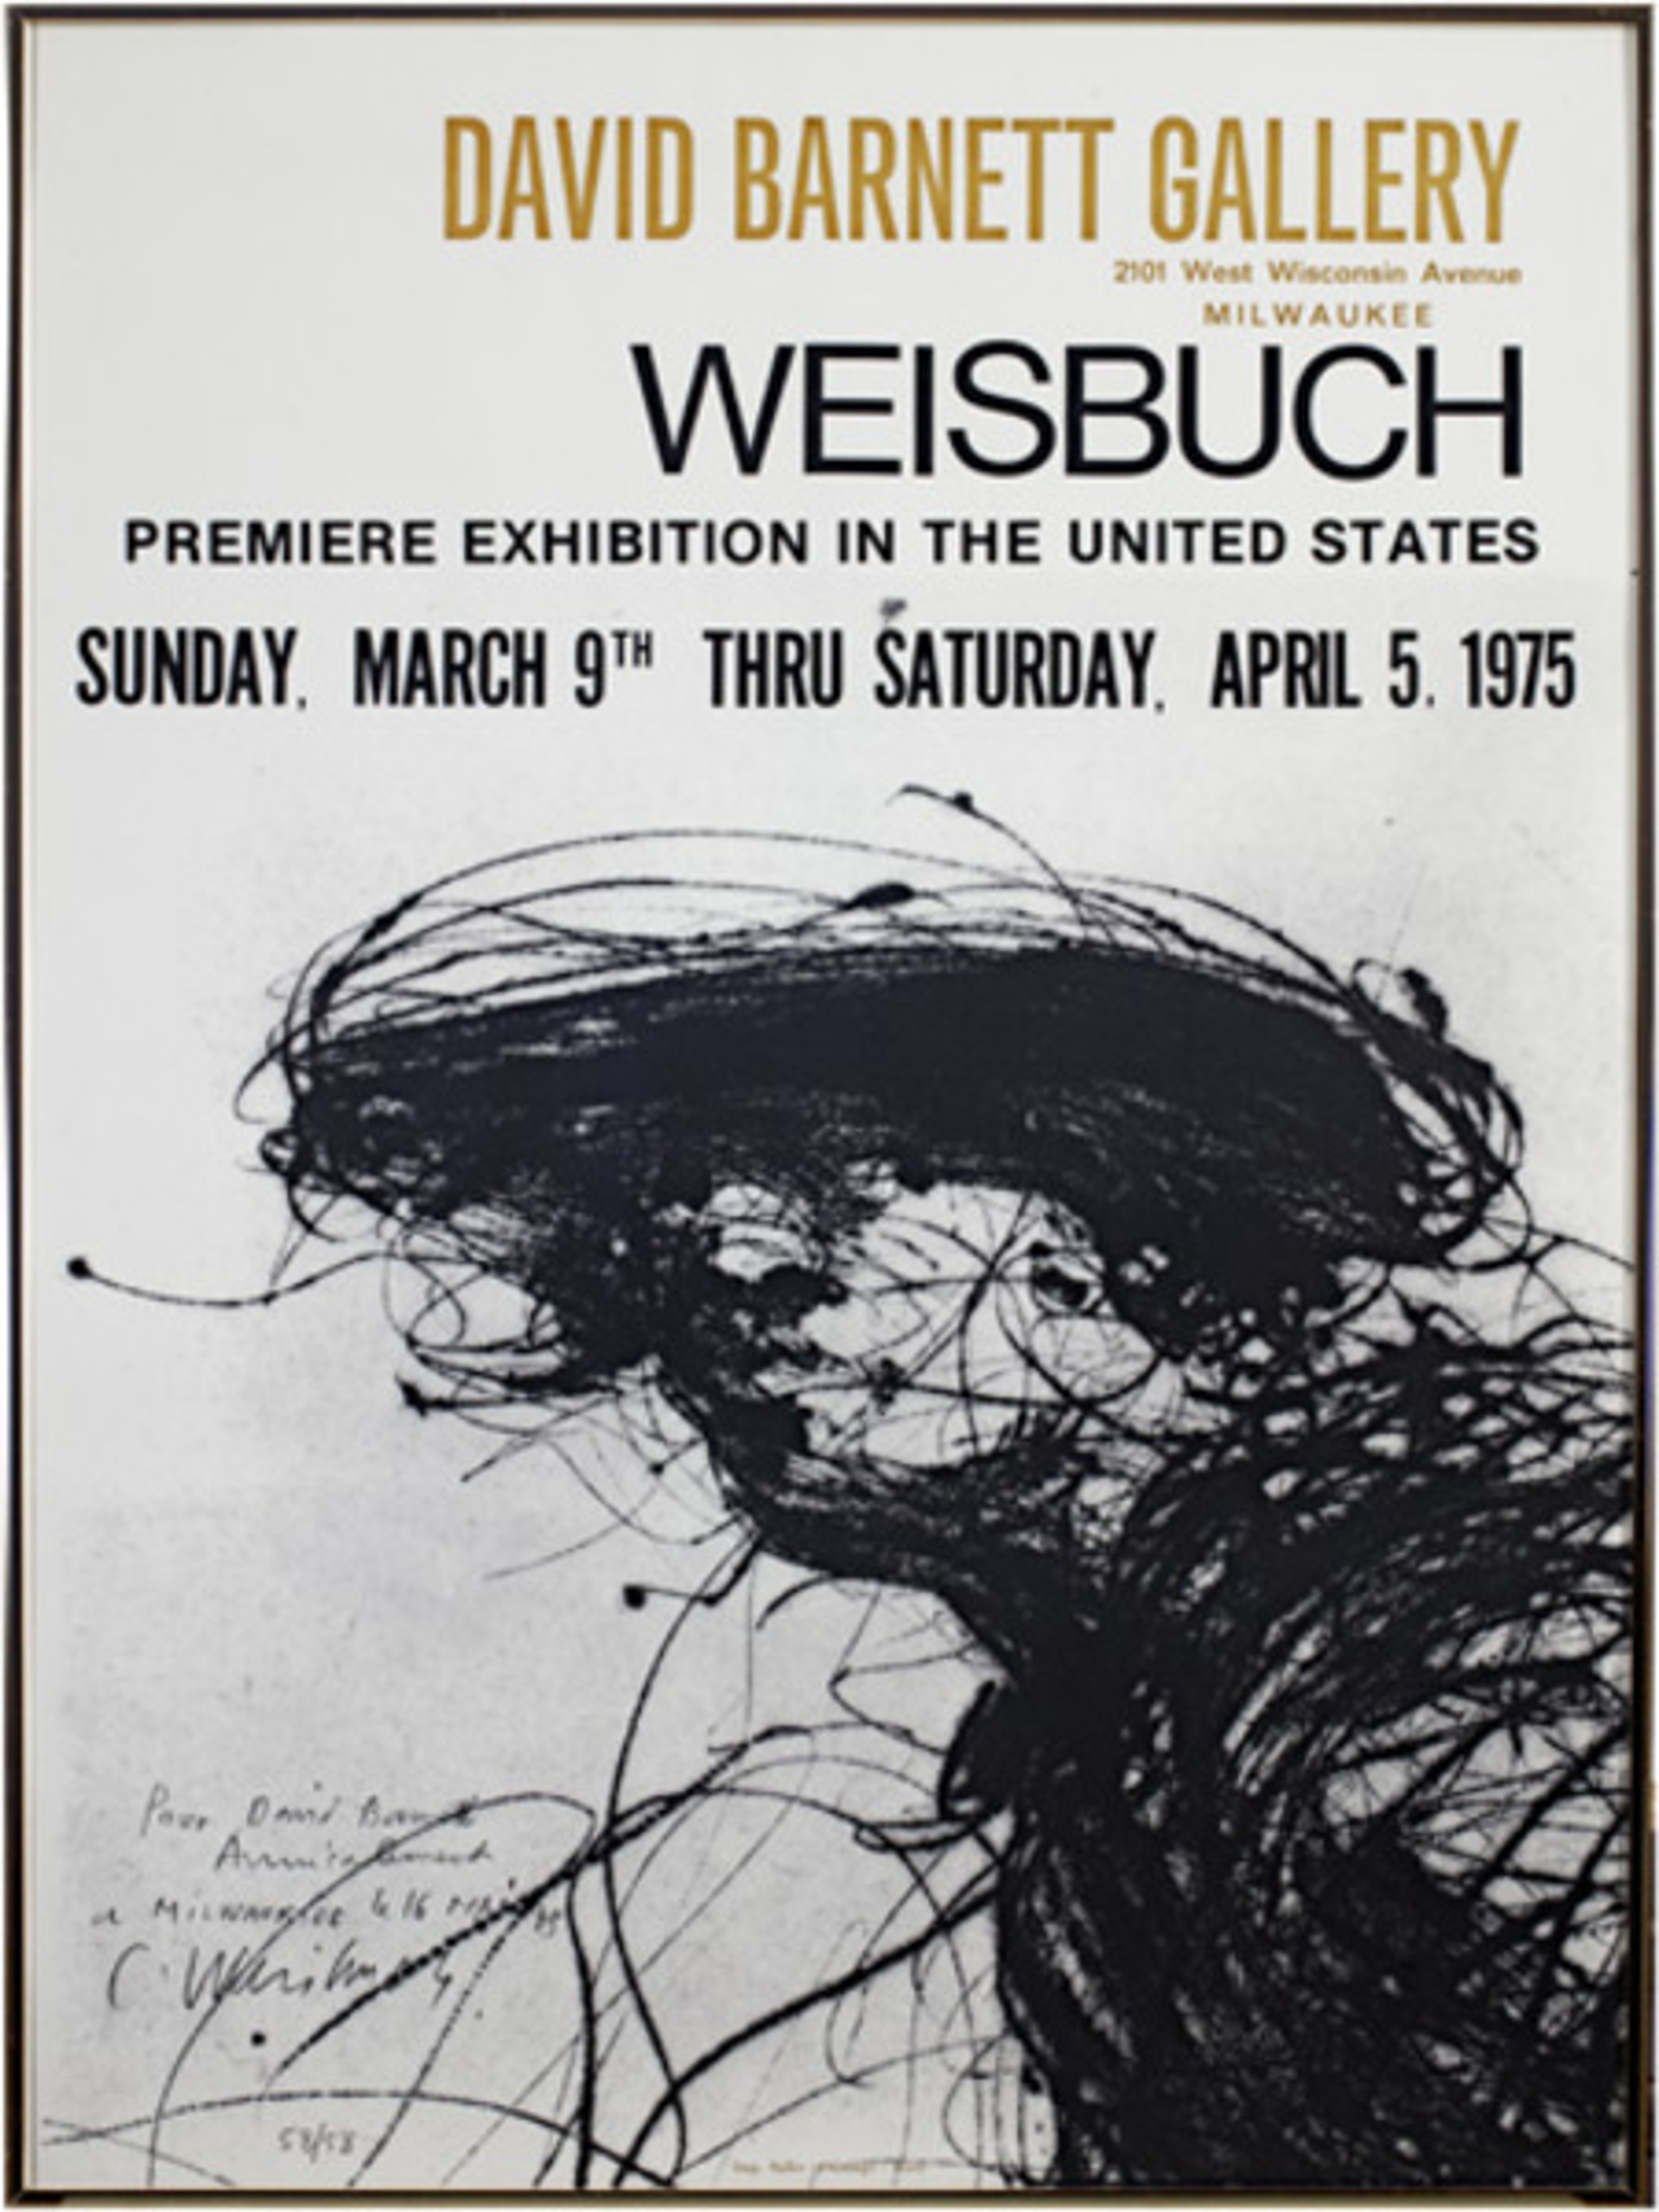 Premiere Exhibition Poster by Claude Weisbuch